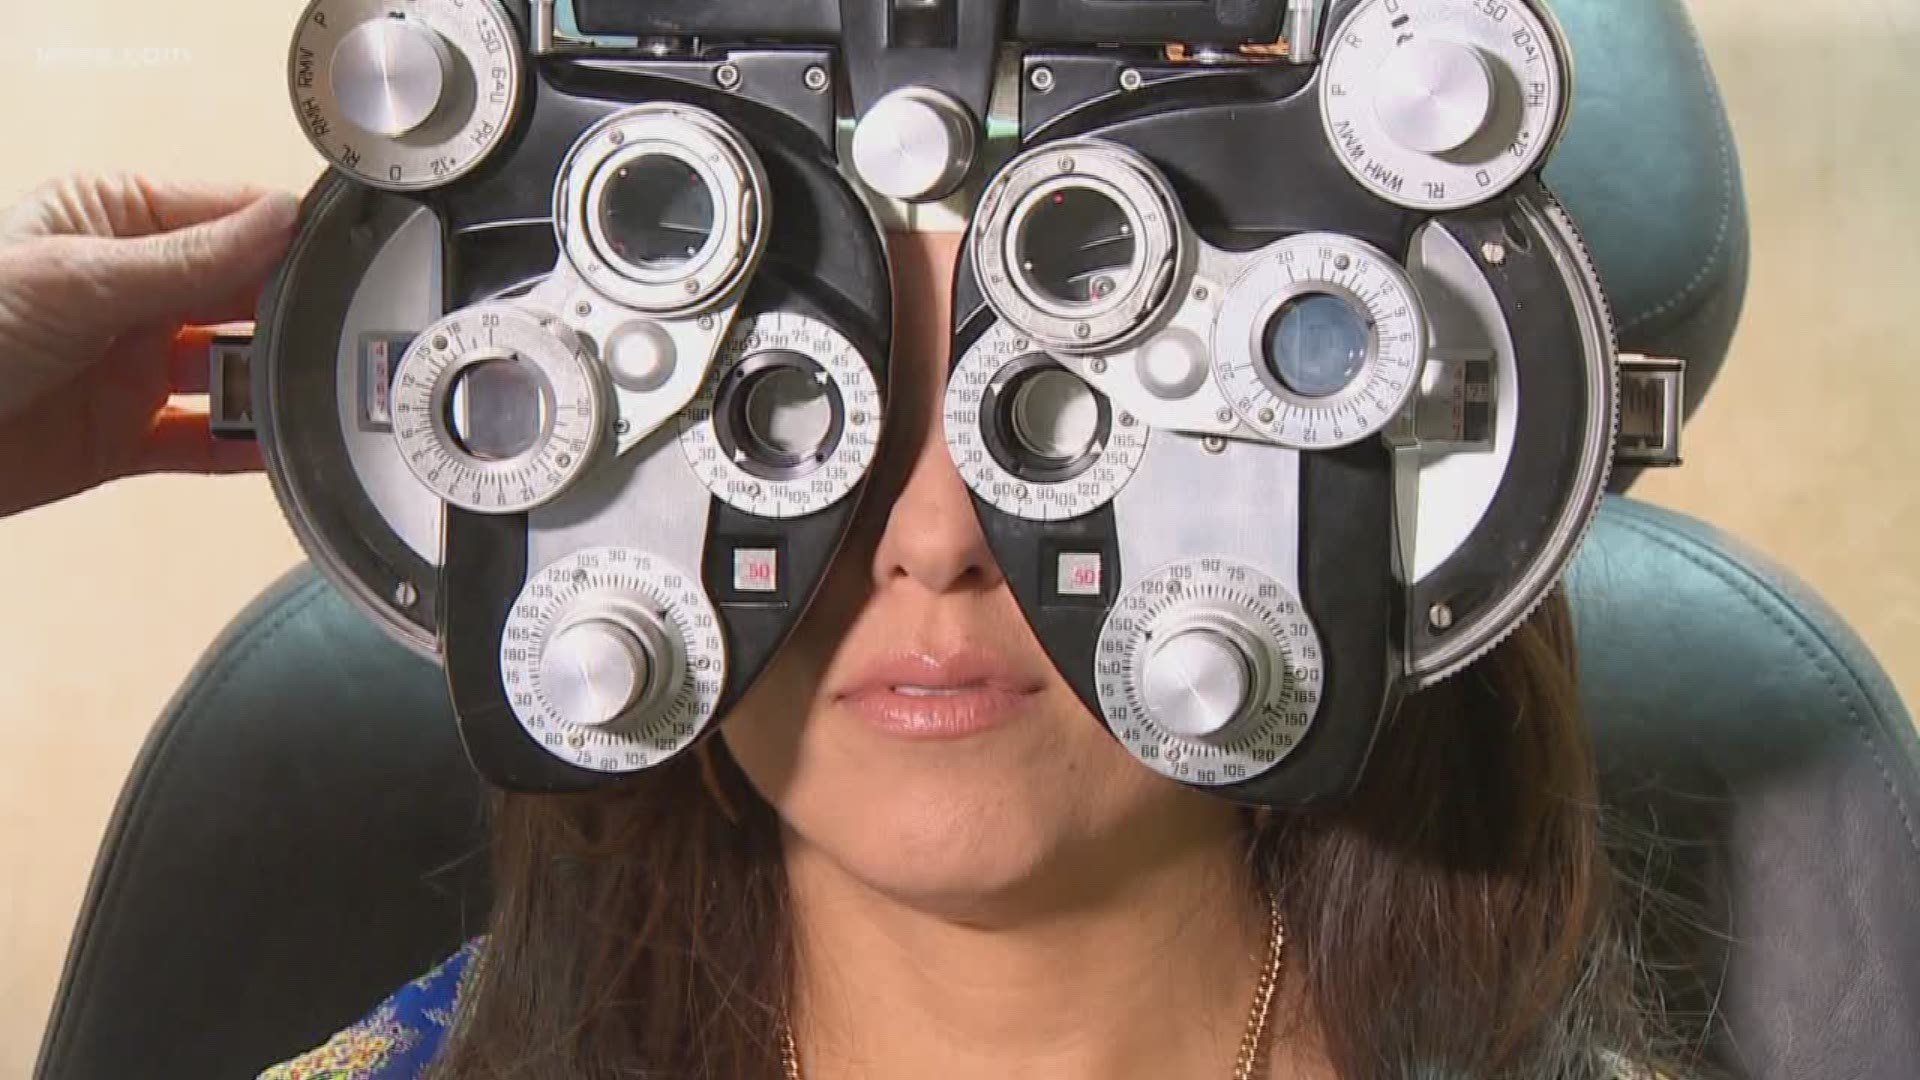 Verify: Can an app replace a trip to the eye doctor?